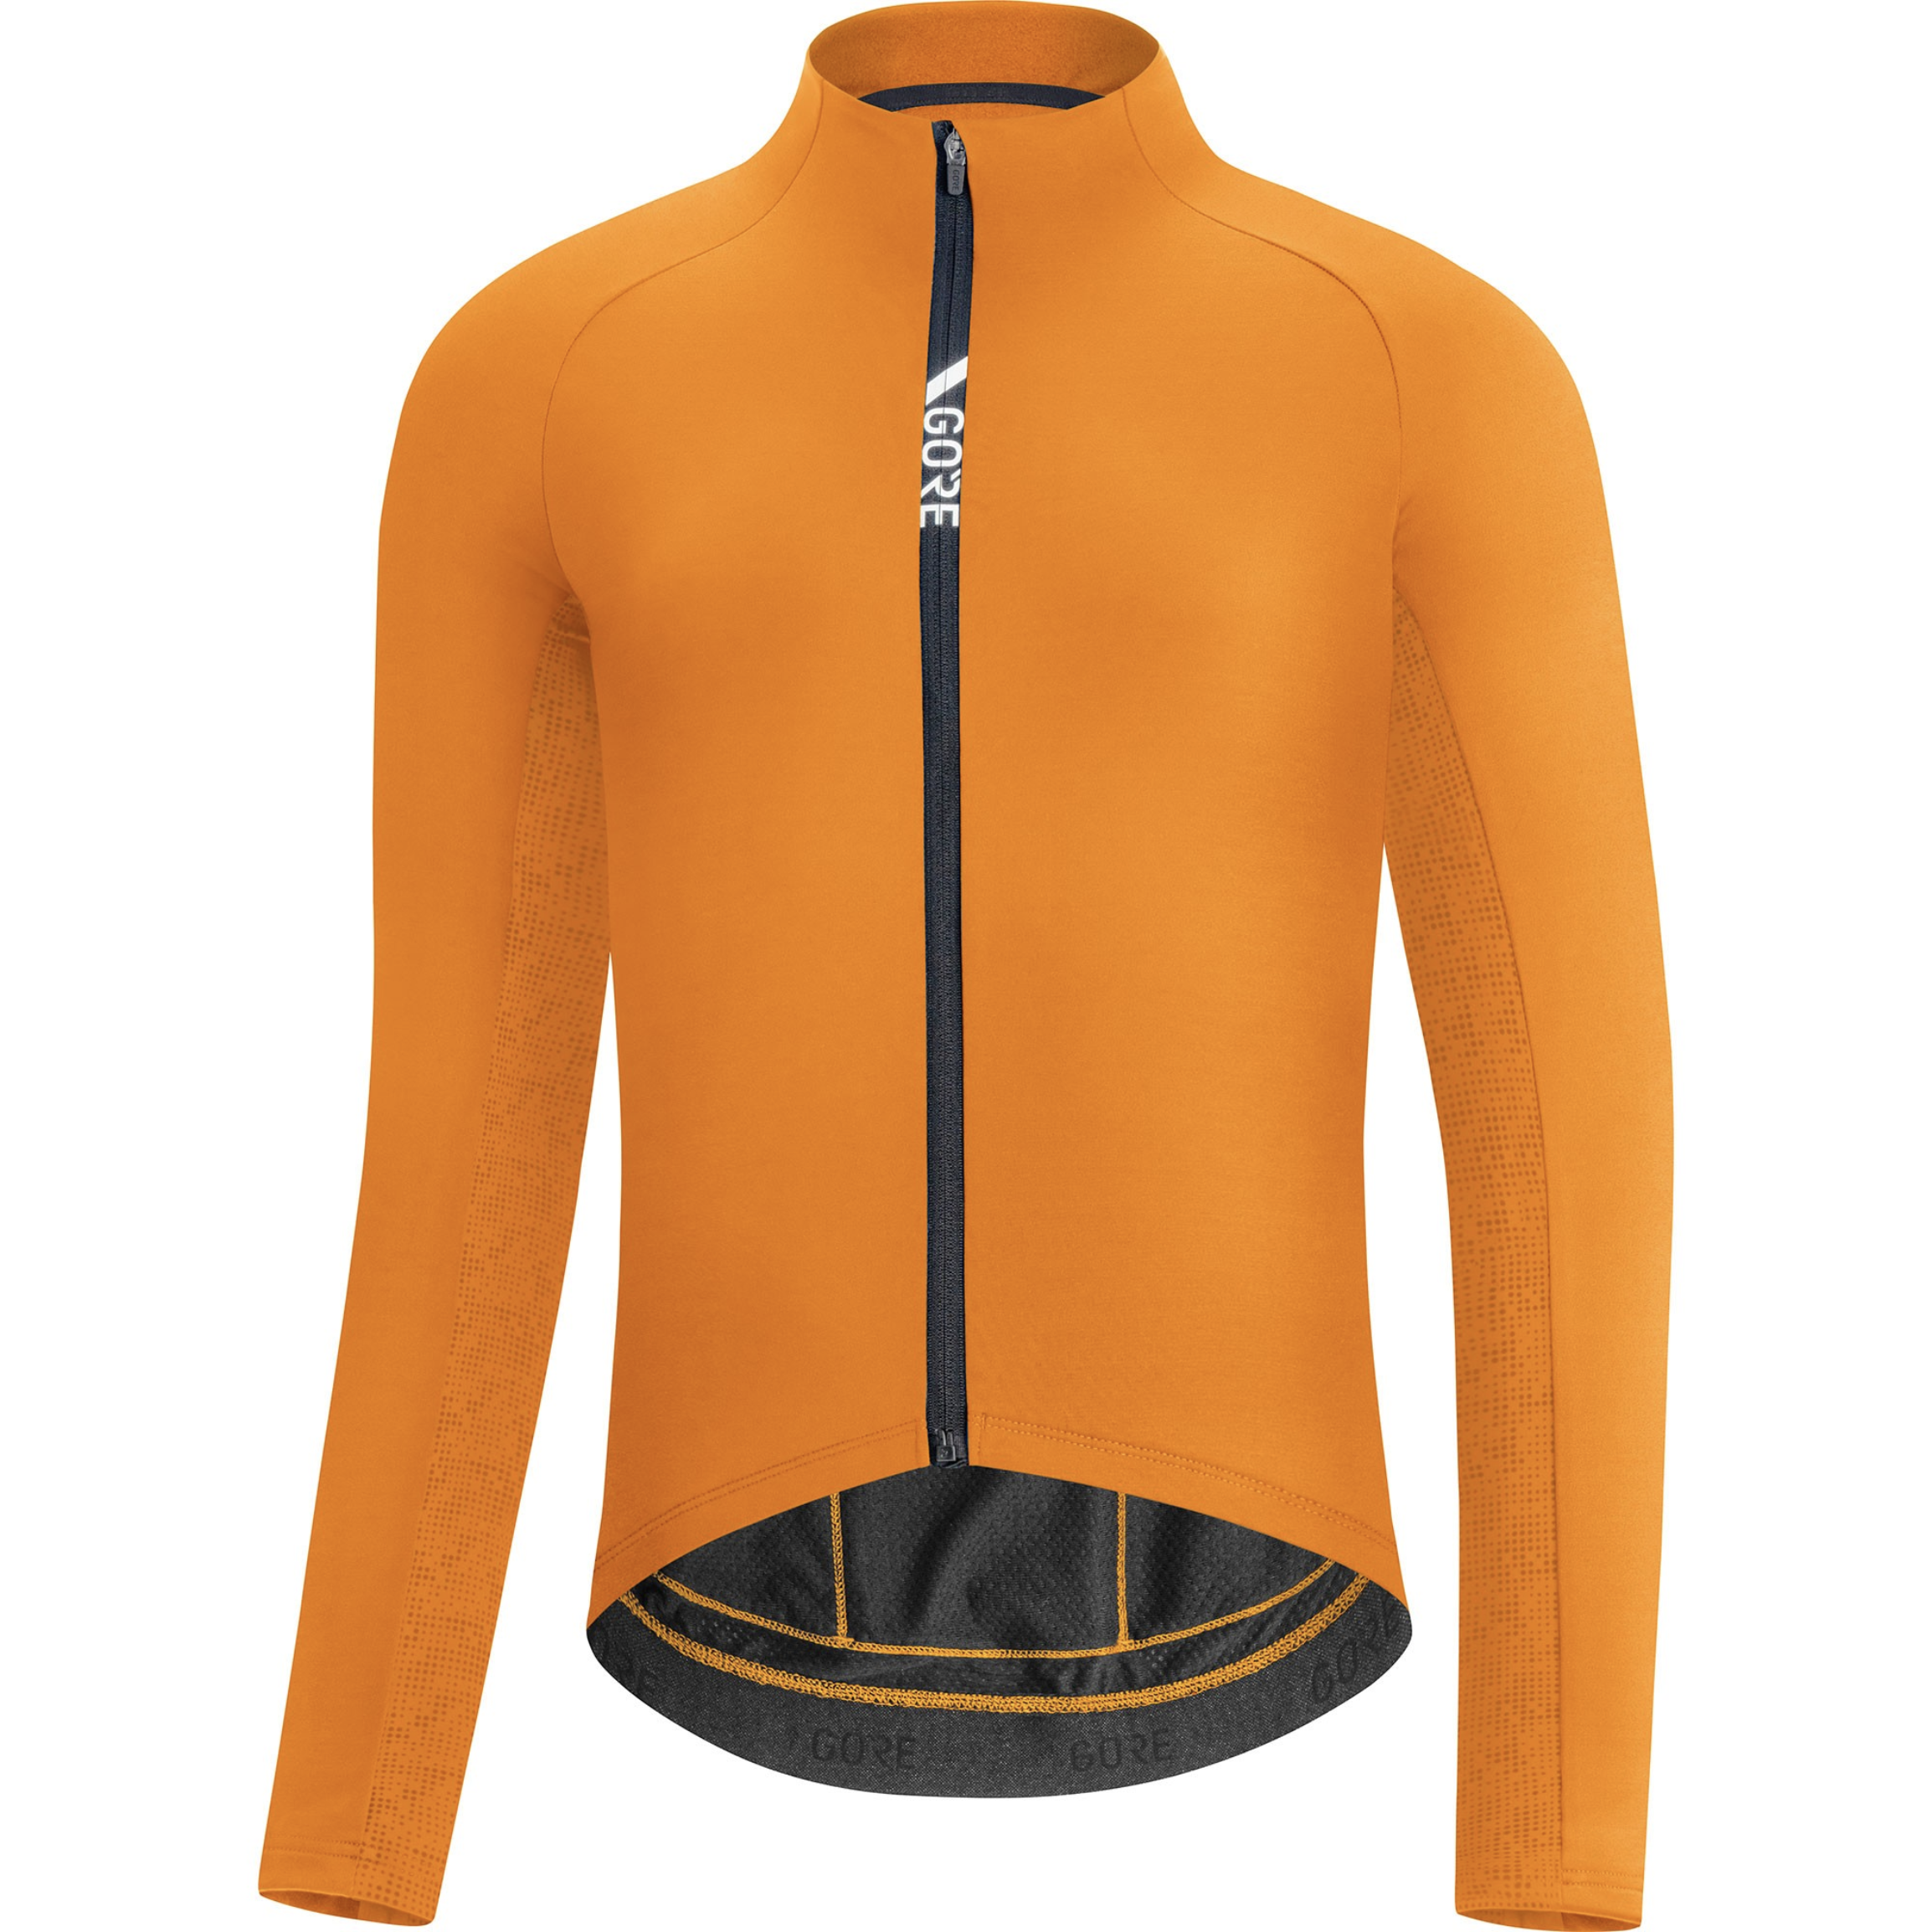 gore cycling jersey image